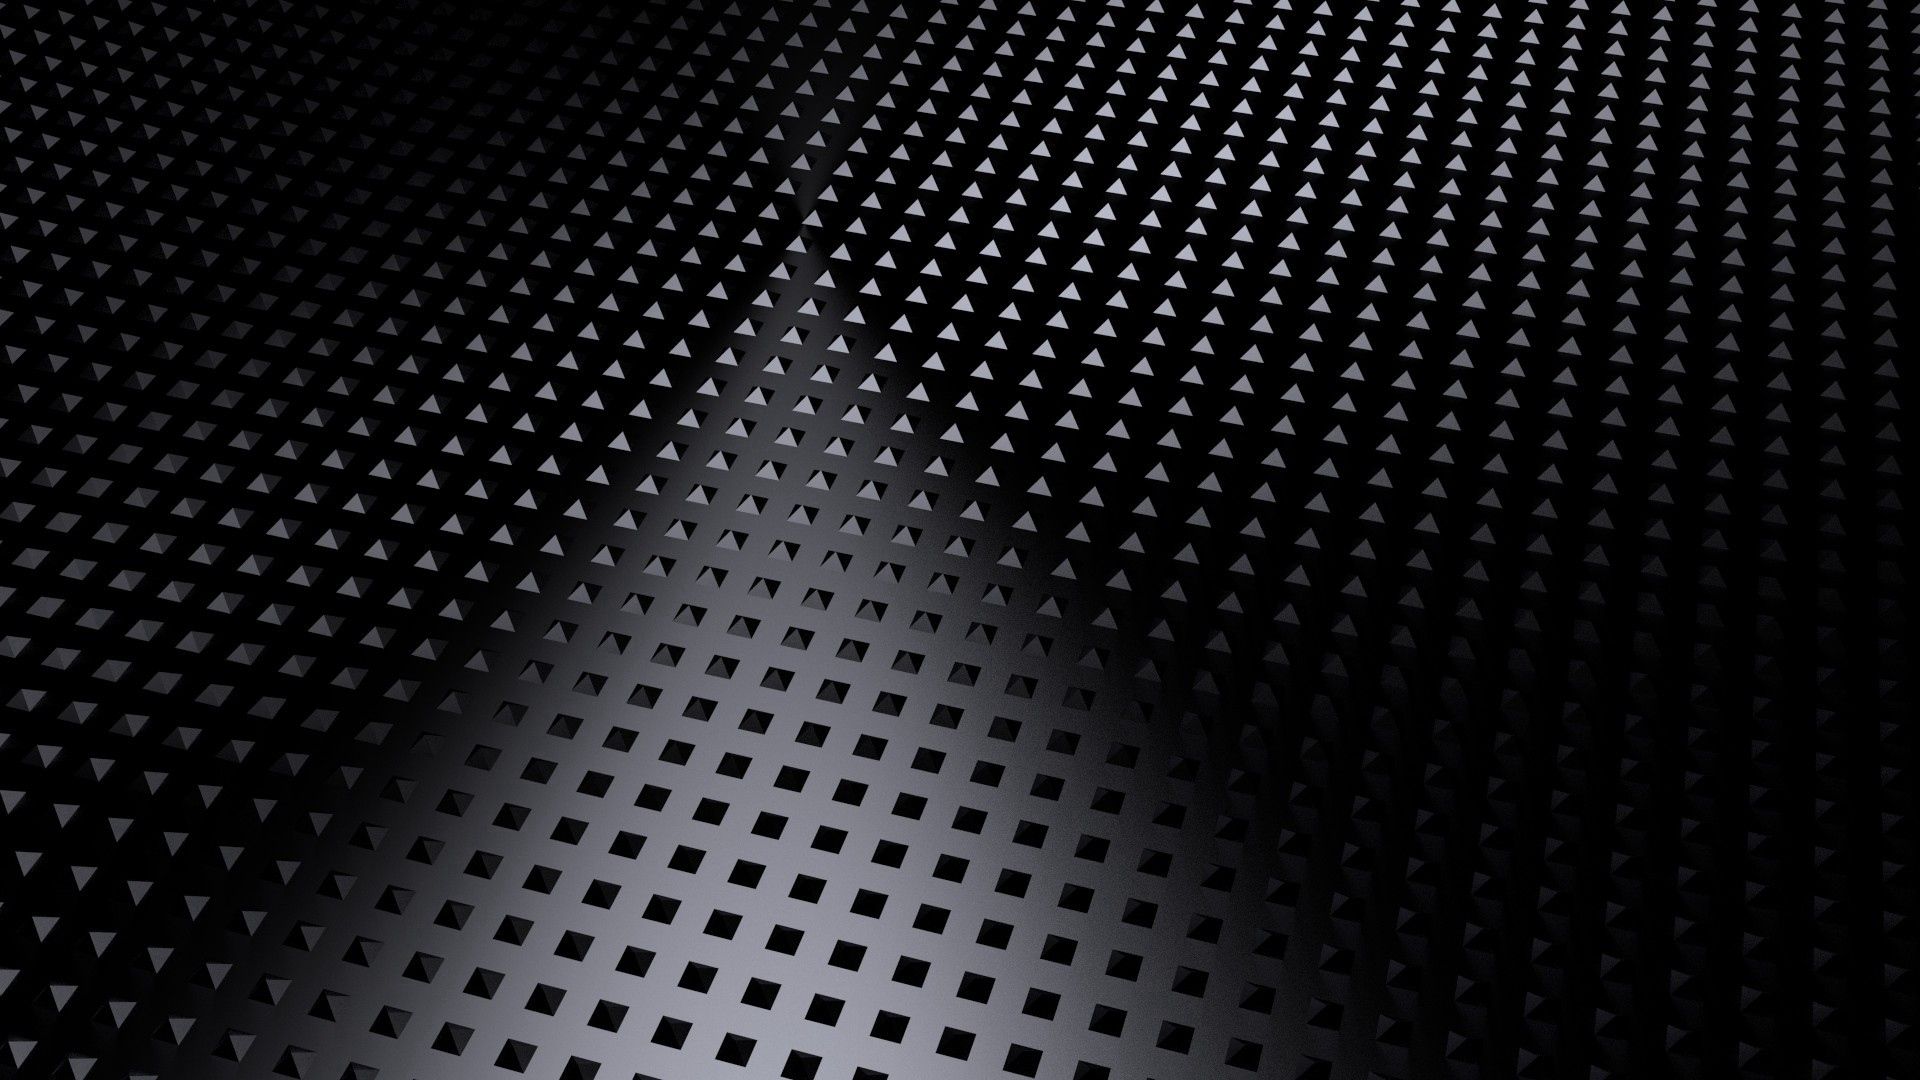 forms, form, dark, texture, textures, grid, rhombuses, diamonds wallpapers for tablet